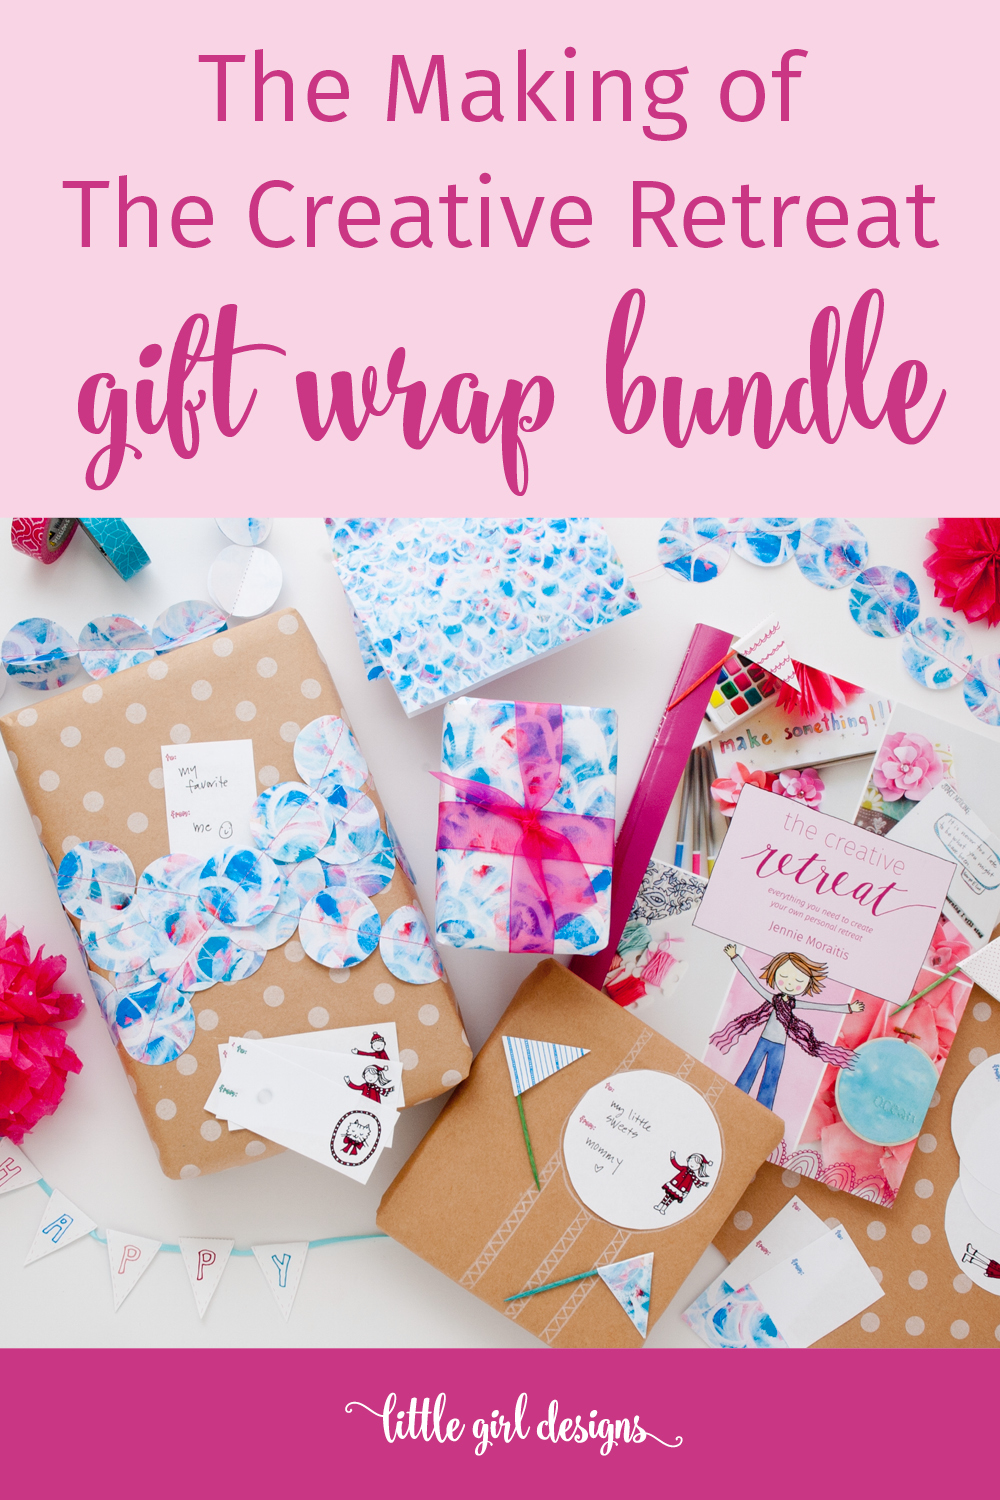 The Making of The Creative Retreat Gift Wrap Bundle